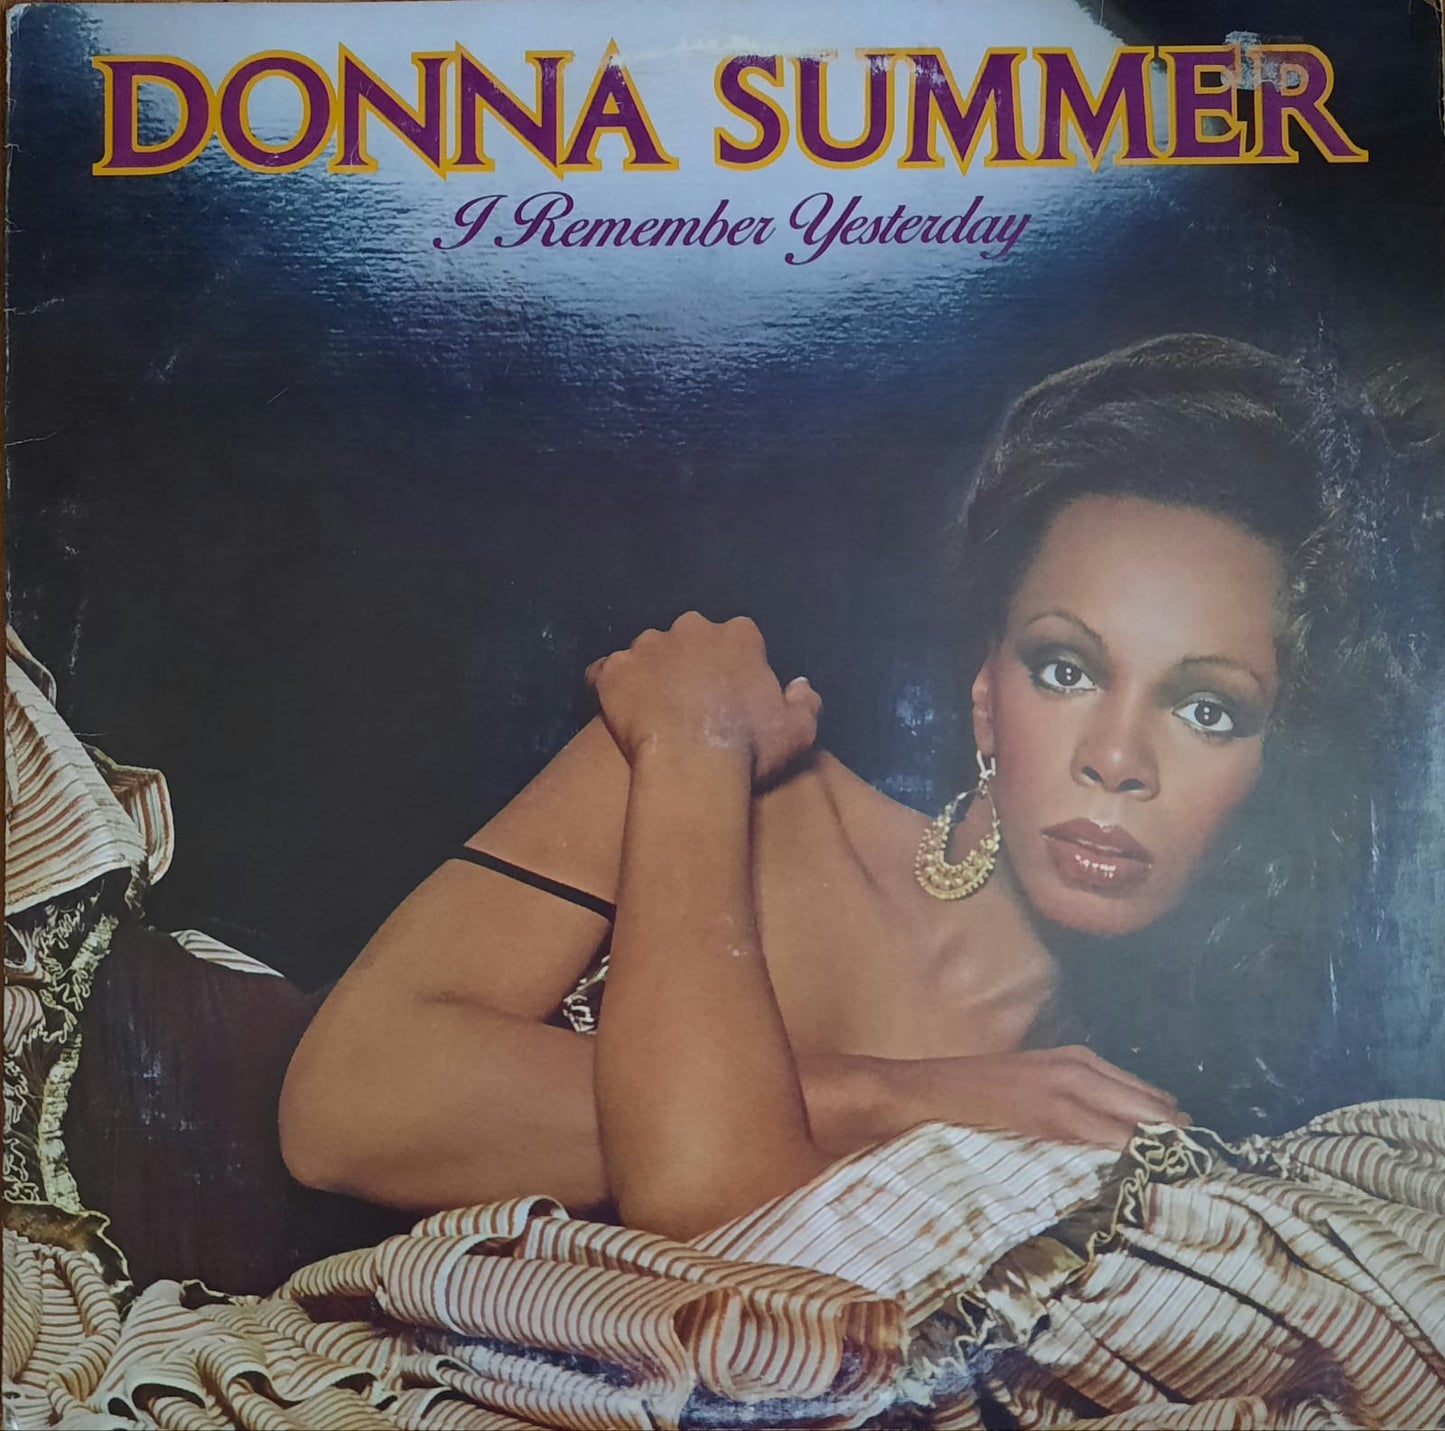 Donna Summer – I Remember Yesterday (LP, EE.UU., 1977)